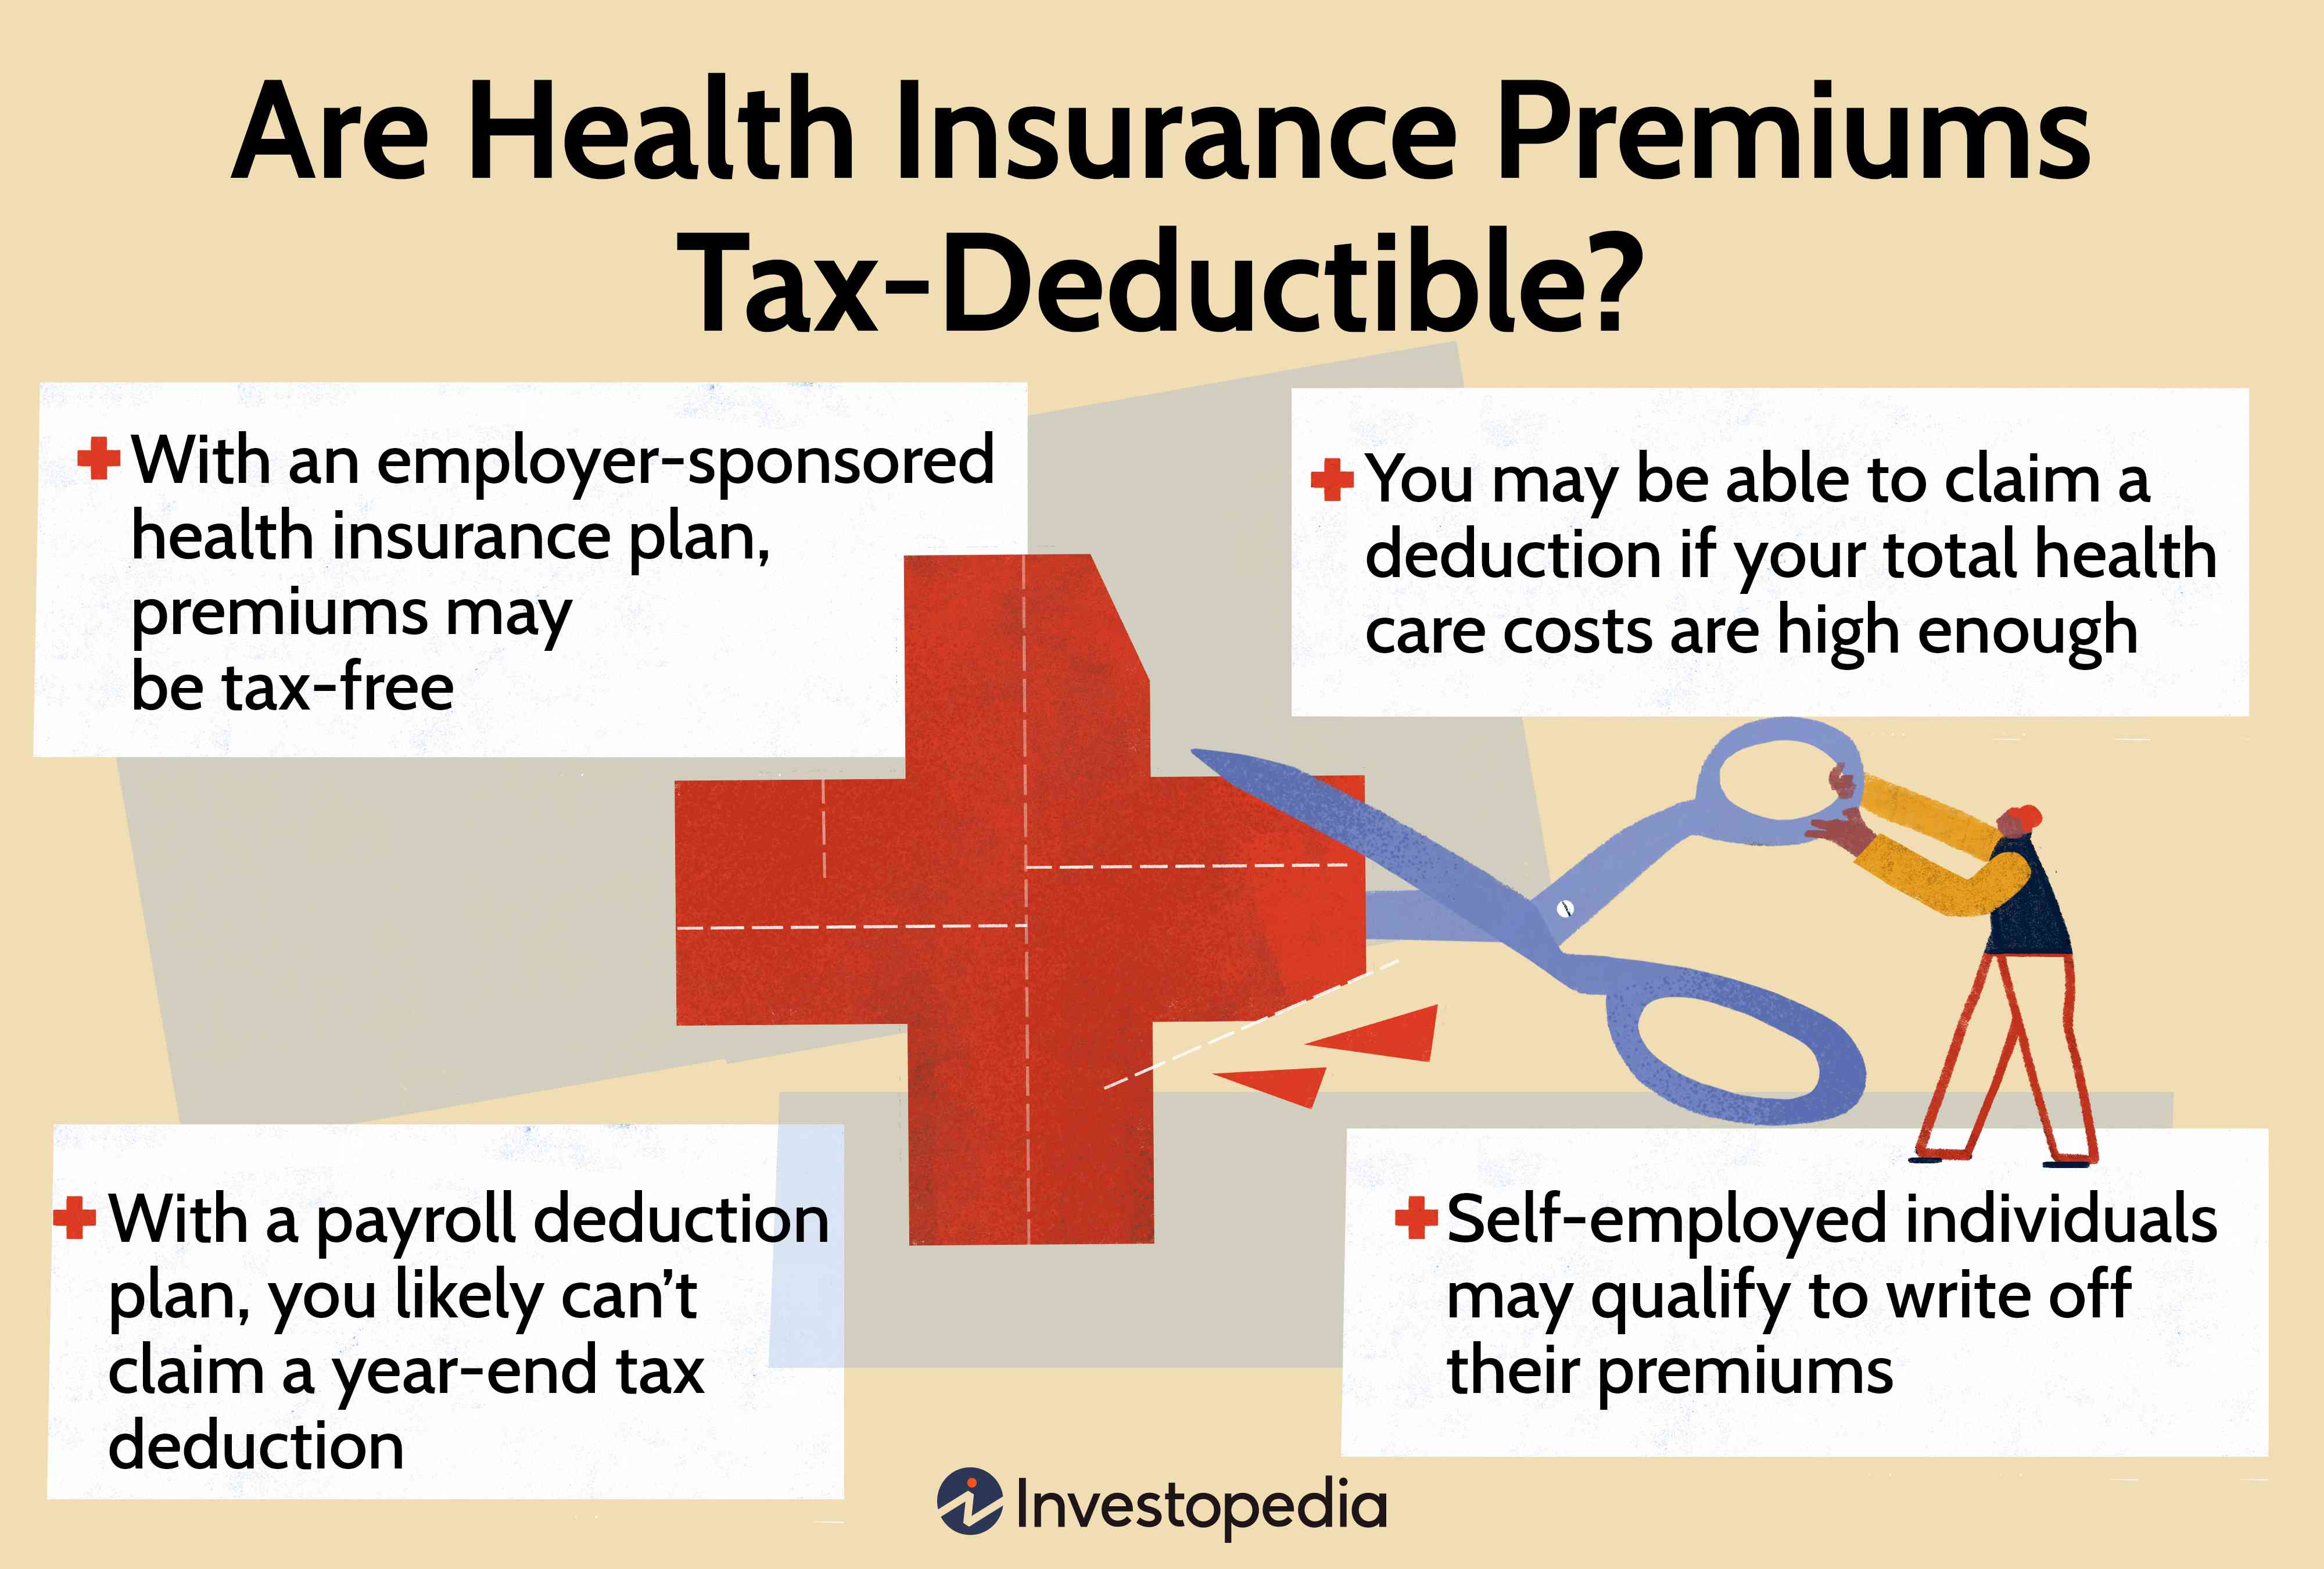 Are there any tax benefits or penalties related to health insurance?